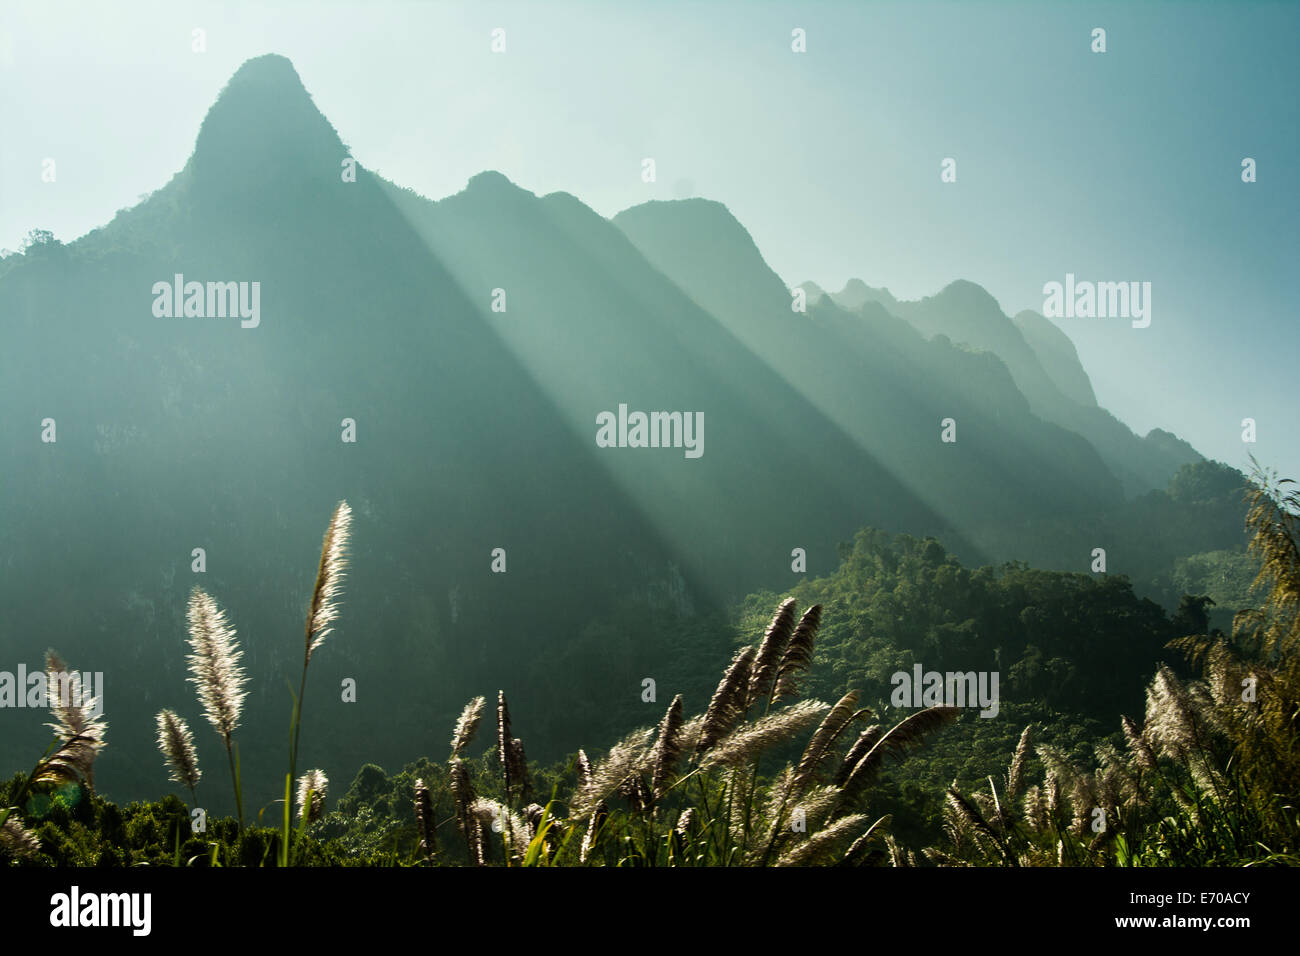 Beautifull landscape in Laos with mountain peaks in background. Stock Photo